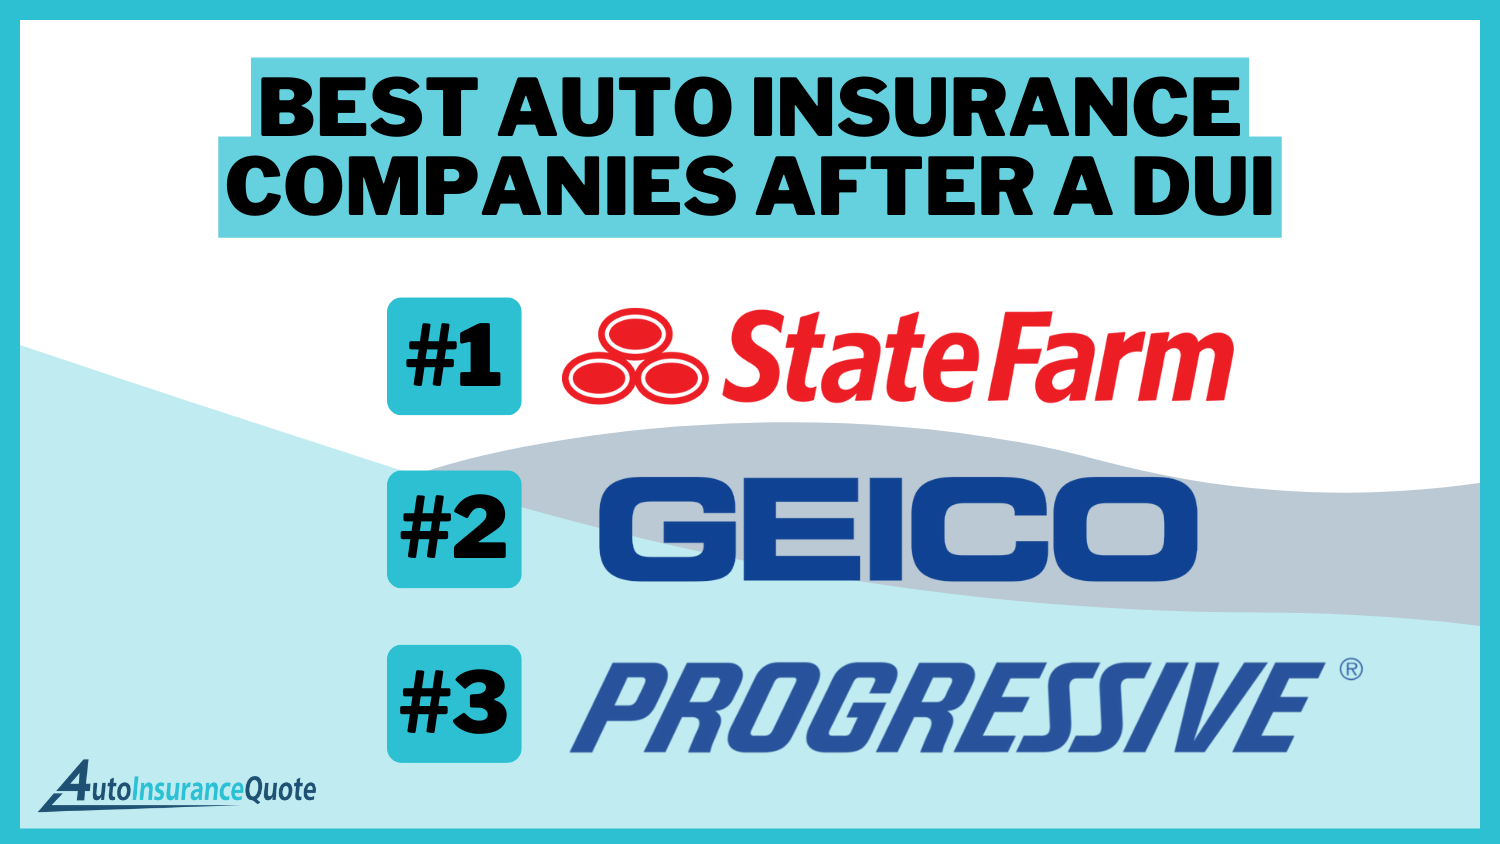 Best Auto Insurance Companies After a DUI: State Farm, Geico, and Progressive